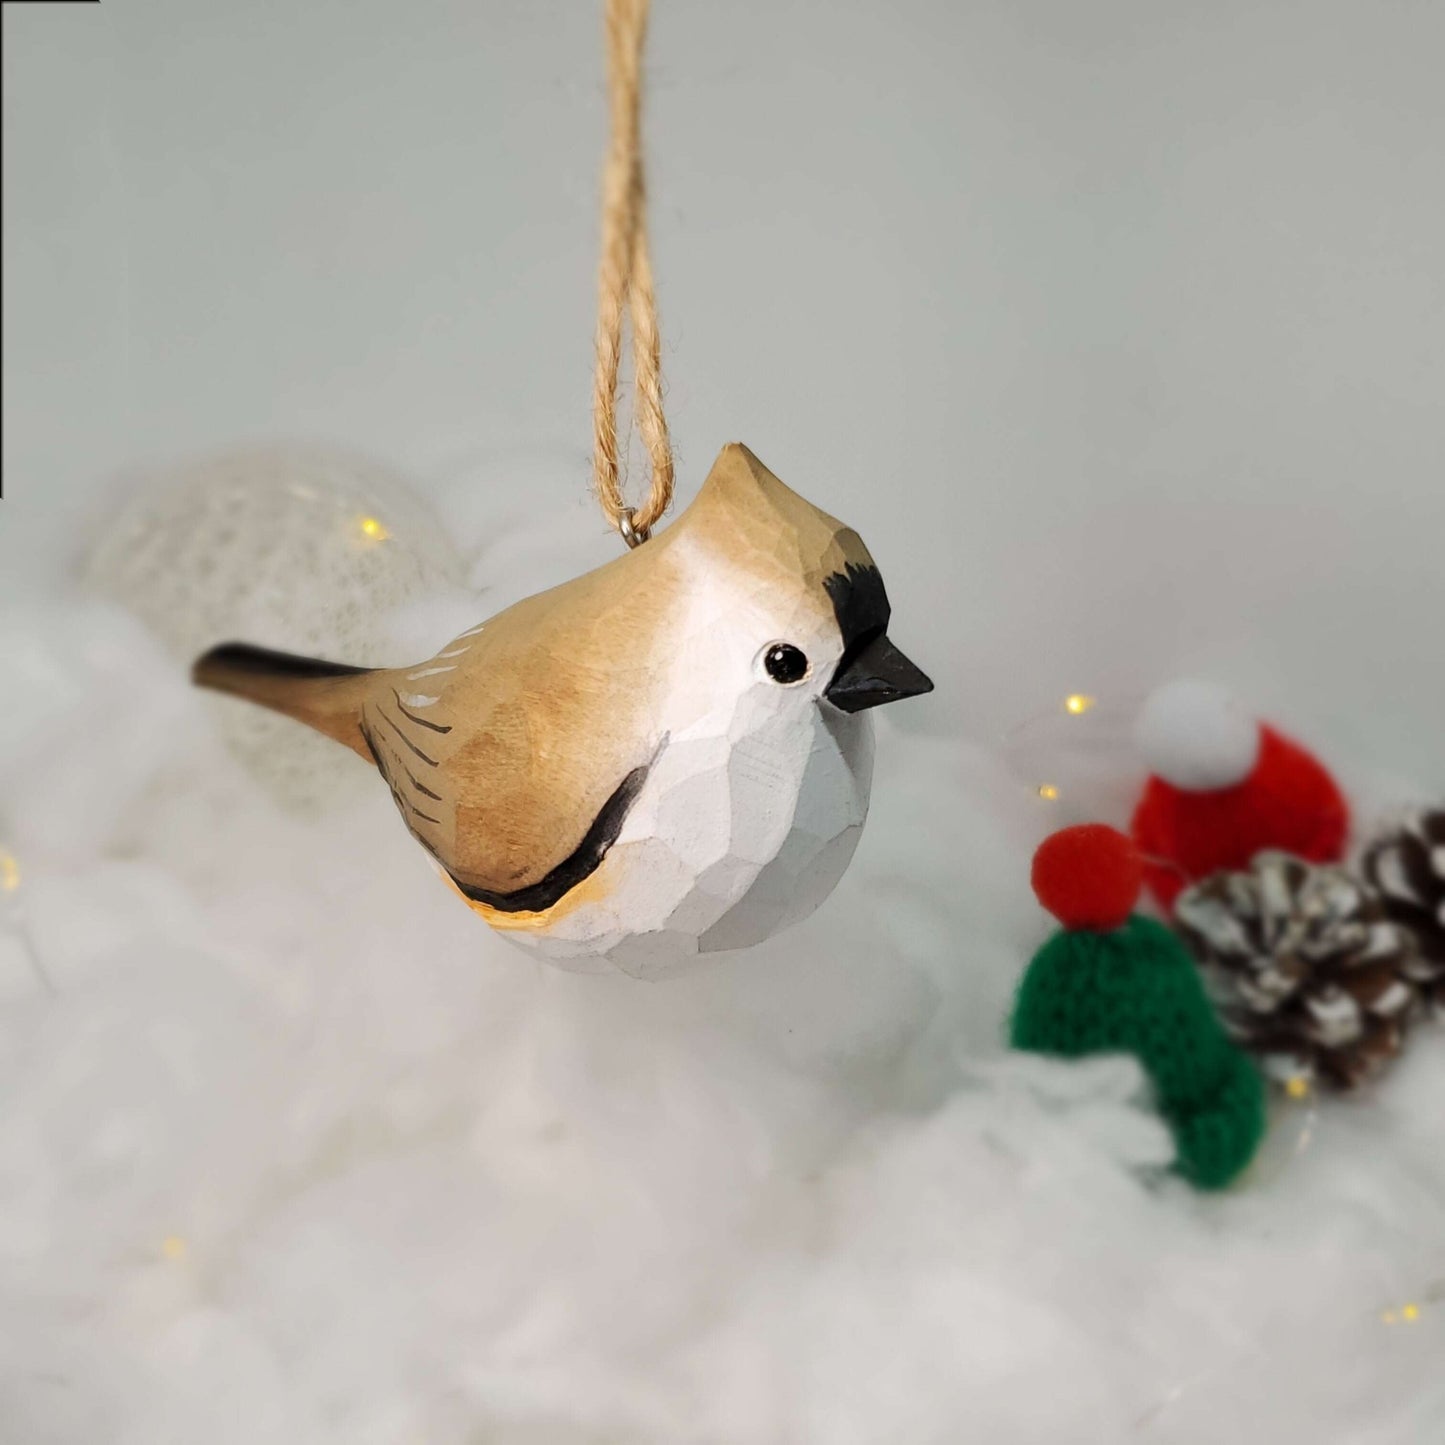 Tufted Titmouse Hanging Ornaments - Wooden Islands